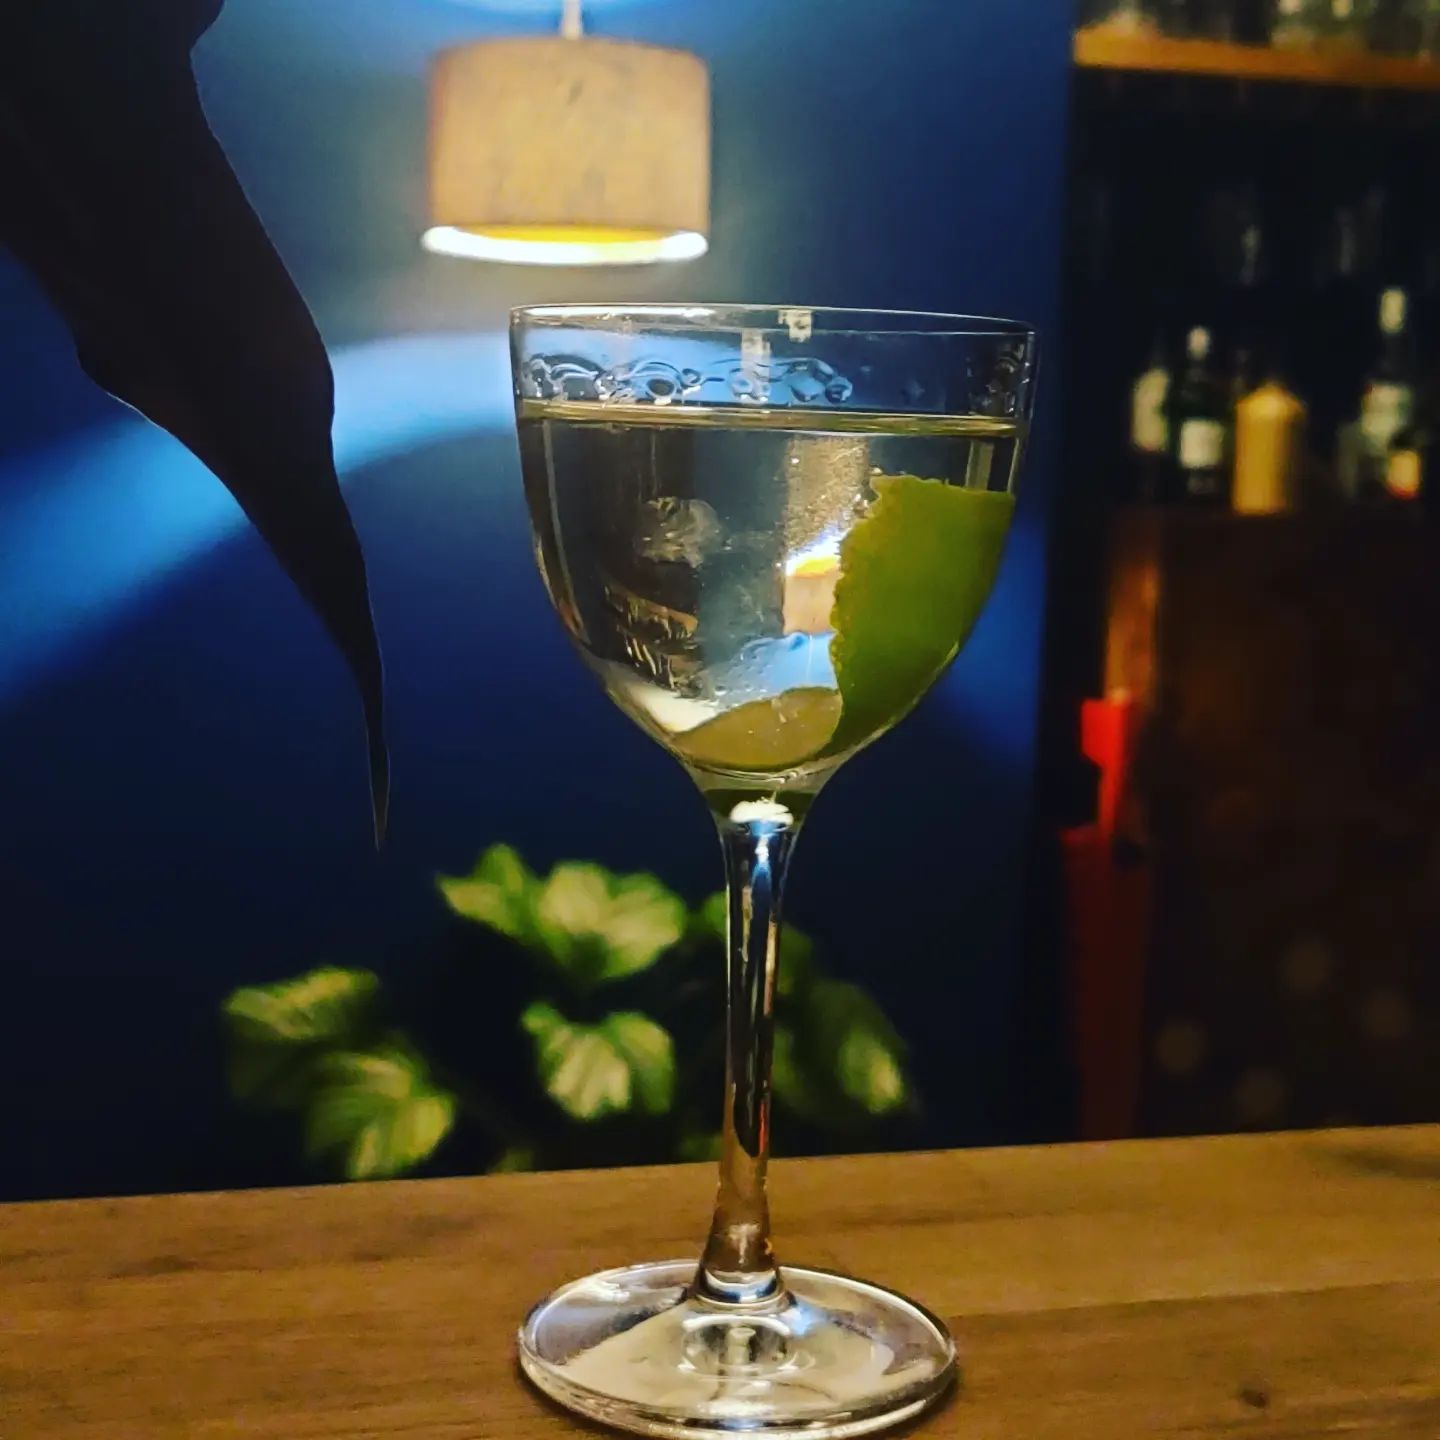 Not so much an #emergencymartini as a #martiniemergency – you can use a twist of lime, right? #tastesgreattome #putlemonsontheshoppinglist #coldcoldgin